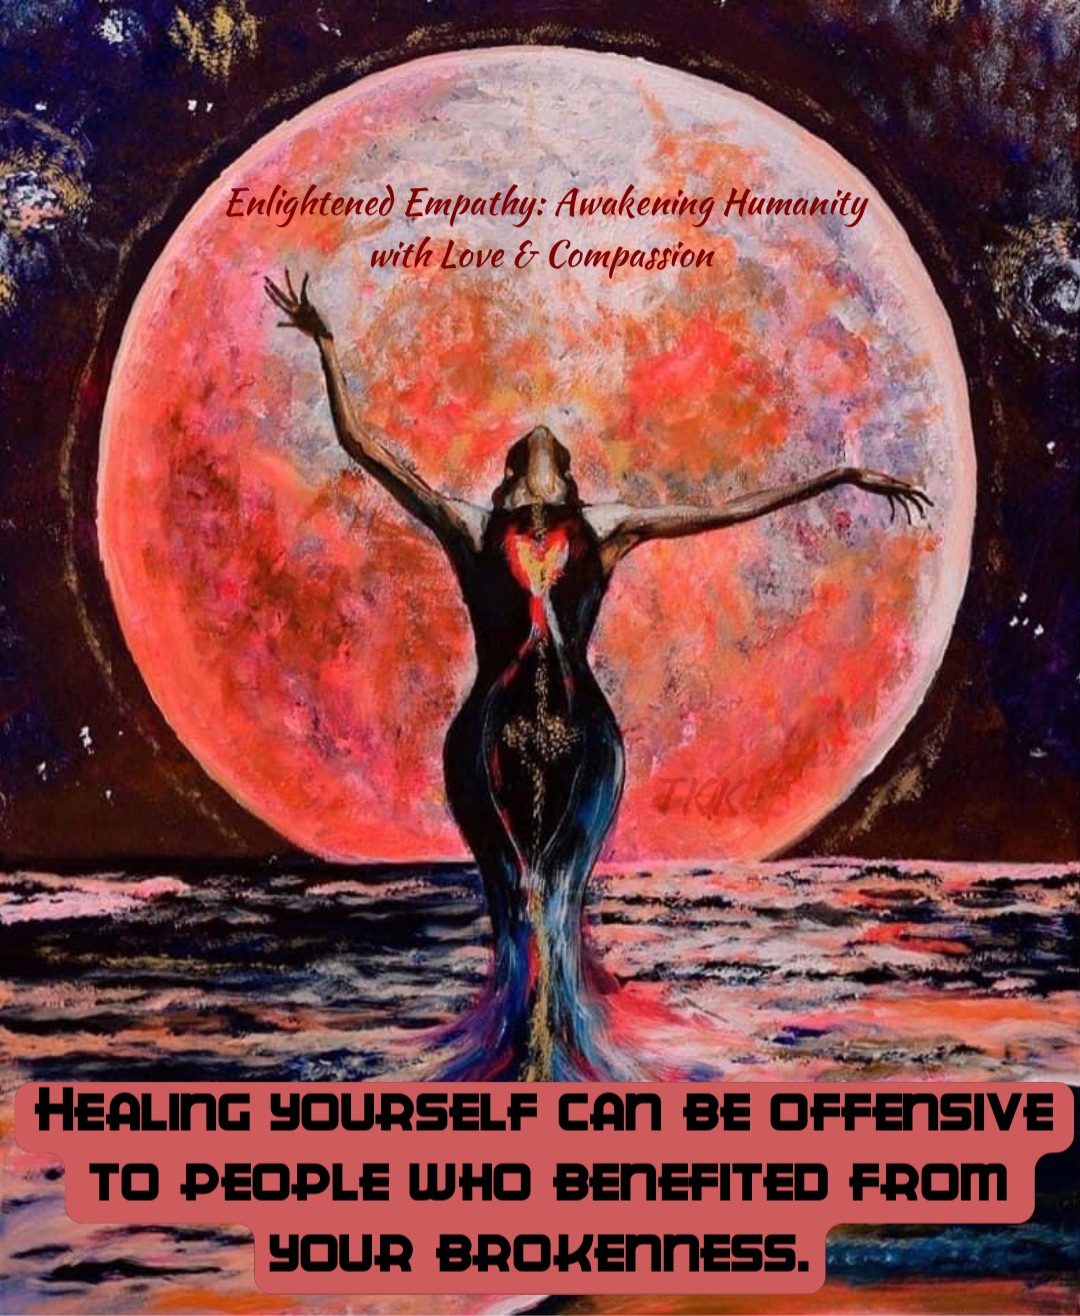 Healing yourself can be offensive to people who benefited from your brokenness.